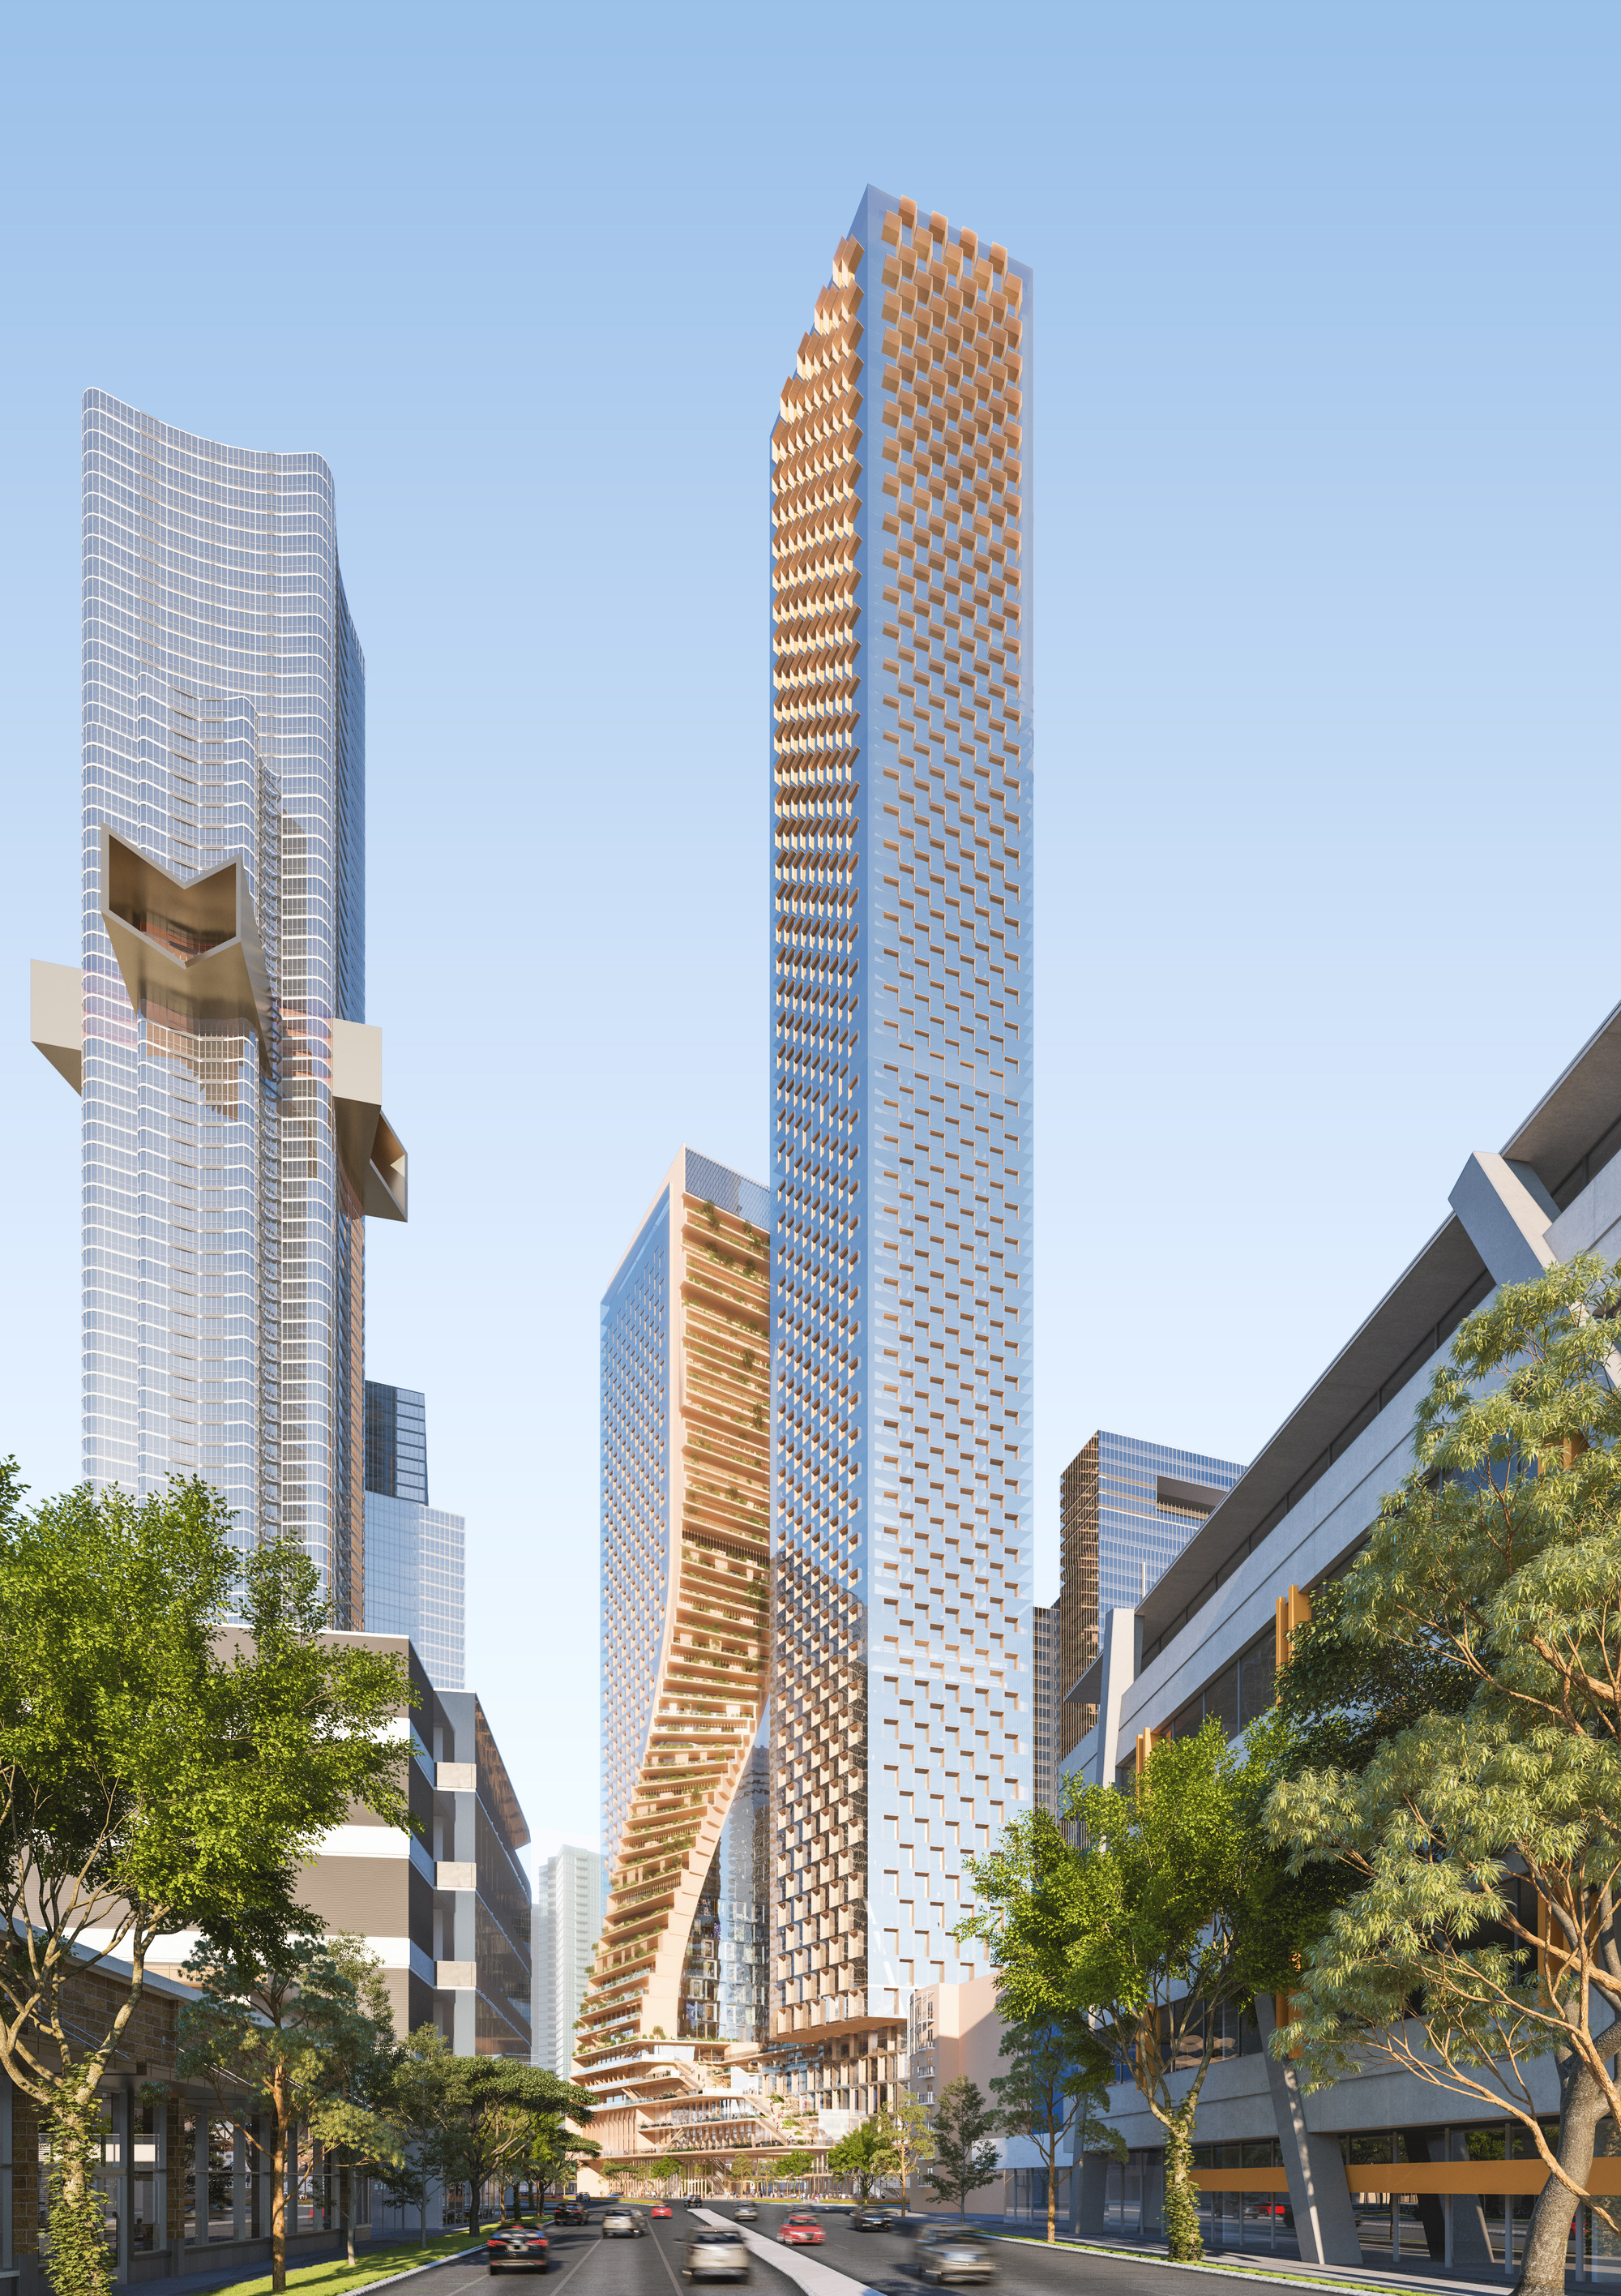 Introducing our Southbank by Beulah proposal – ‘Green Spine’